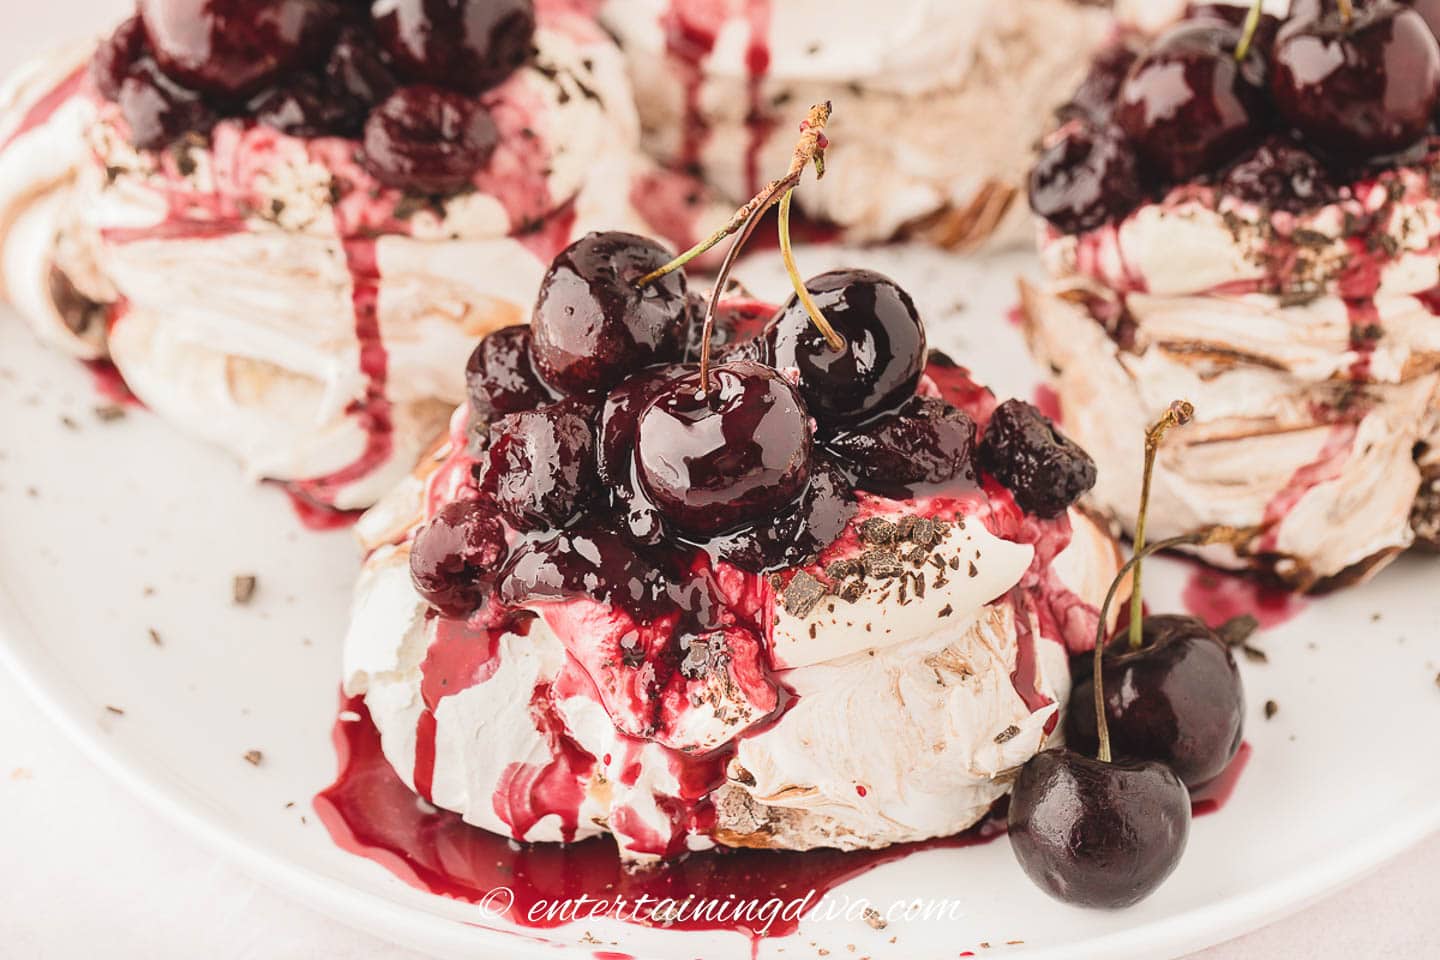 A black forest mini pavlova on a plate with cherries and other pavlovas